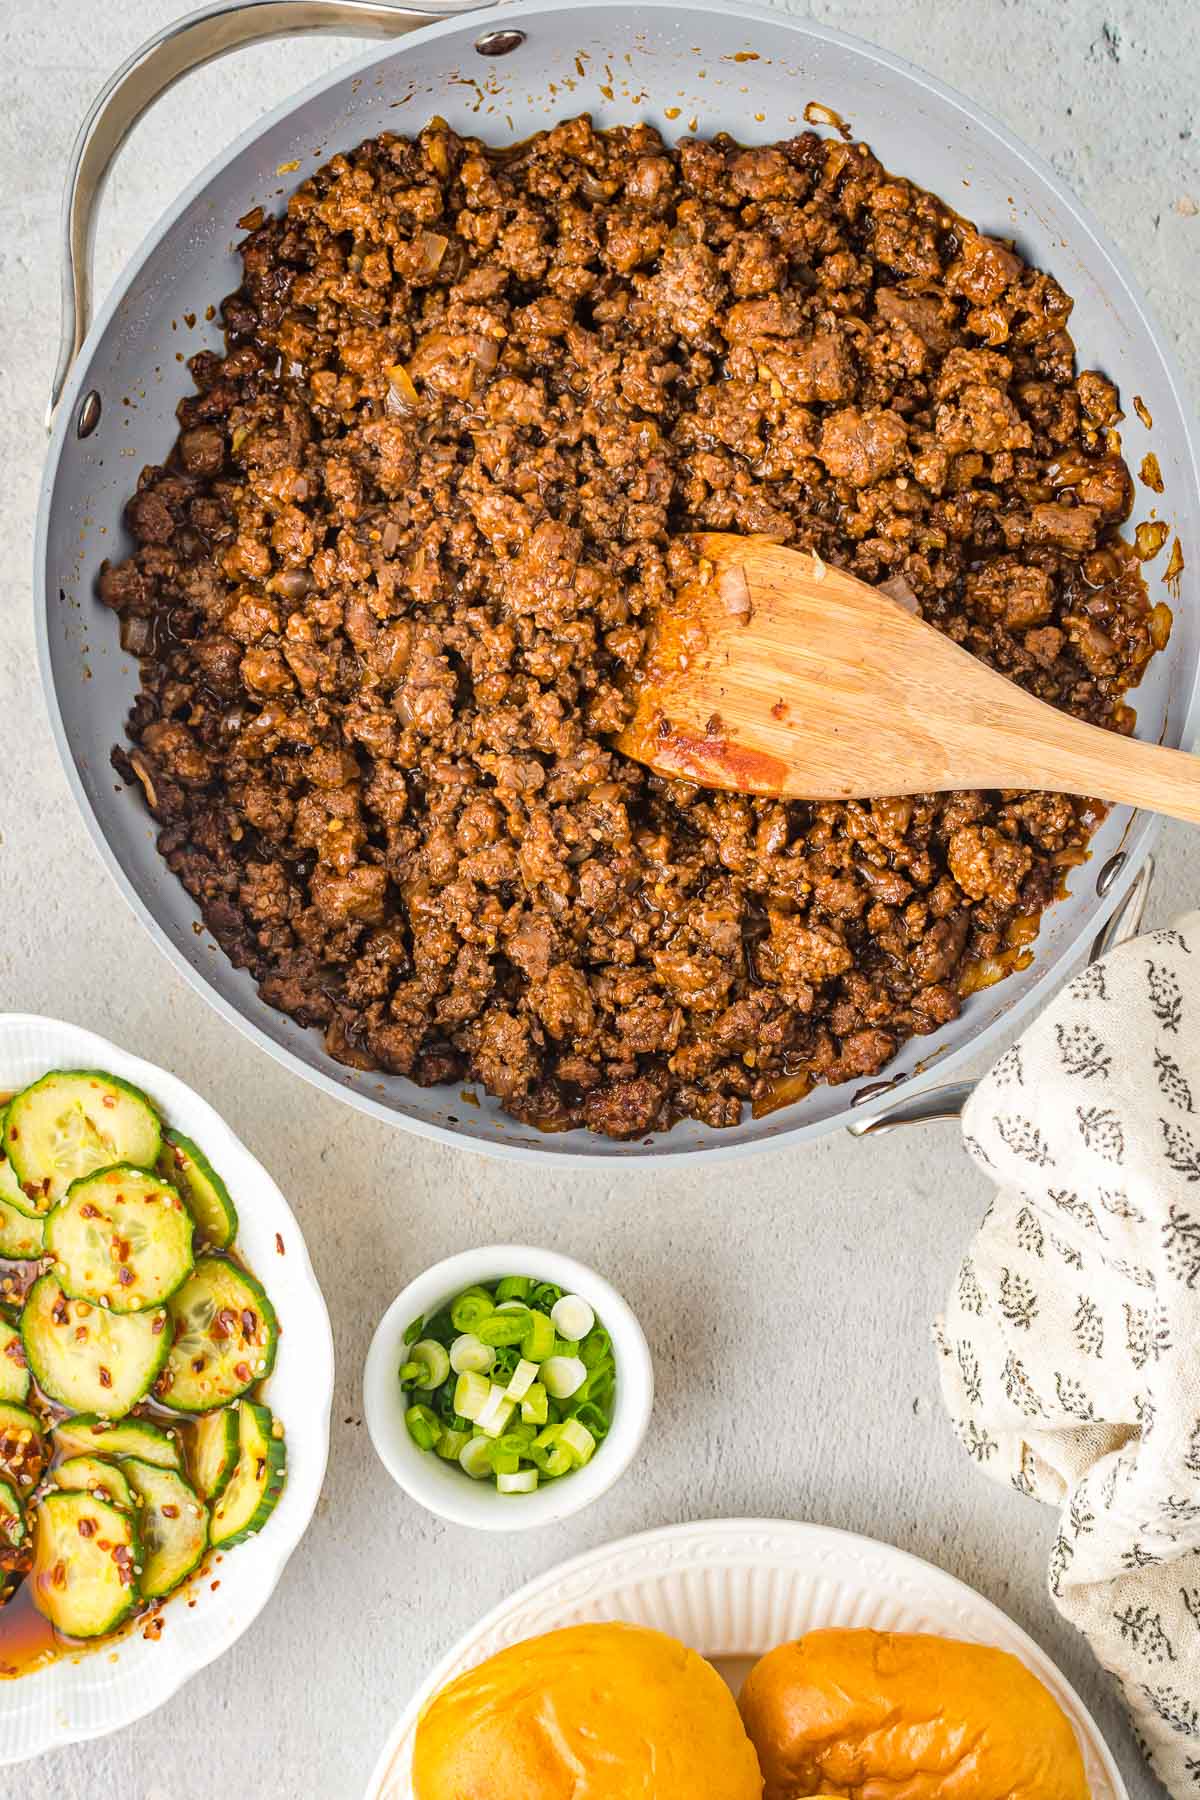 Skillet filled with sloppy joes being stirred by a wooden spoon.